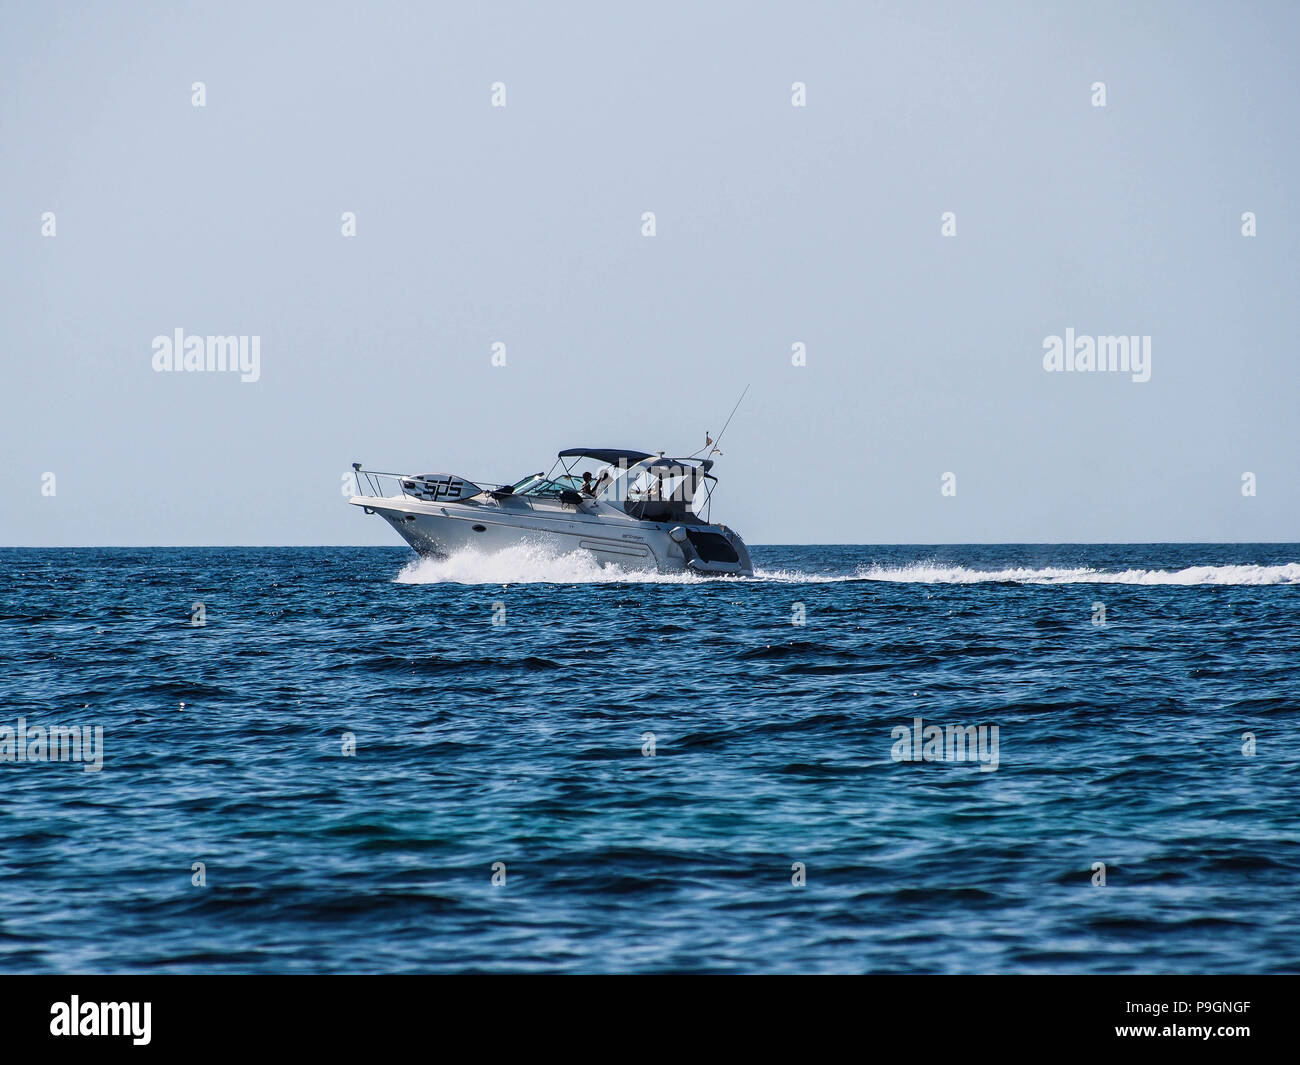 A Motorboat on the Medeterranean sea Stock Photo